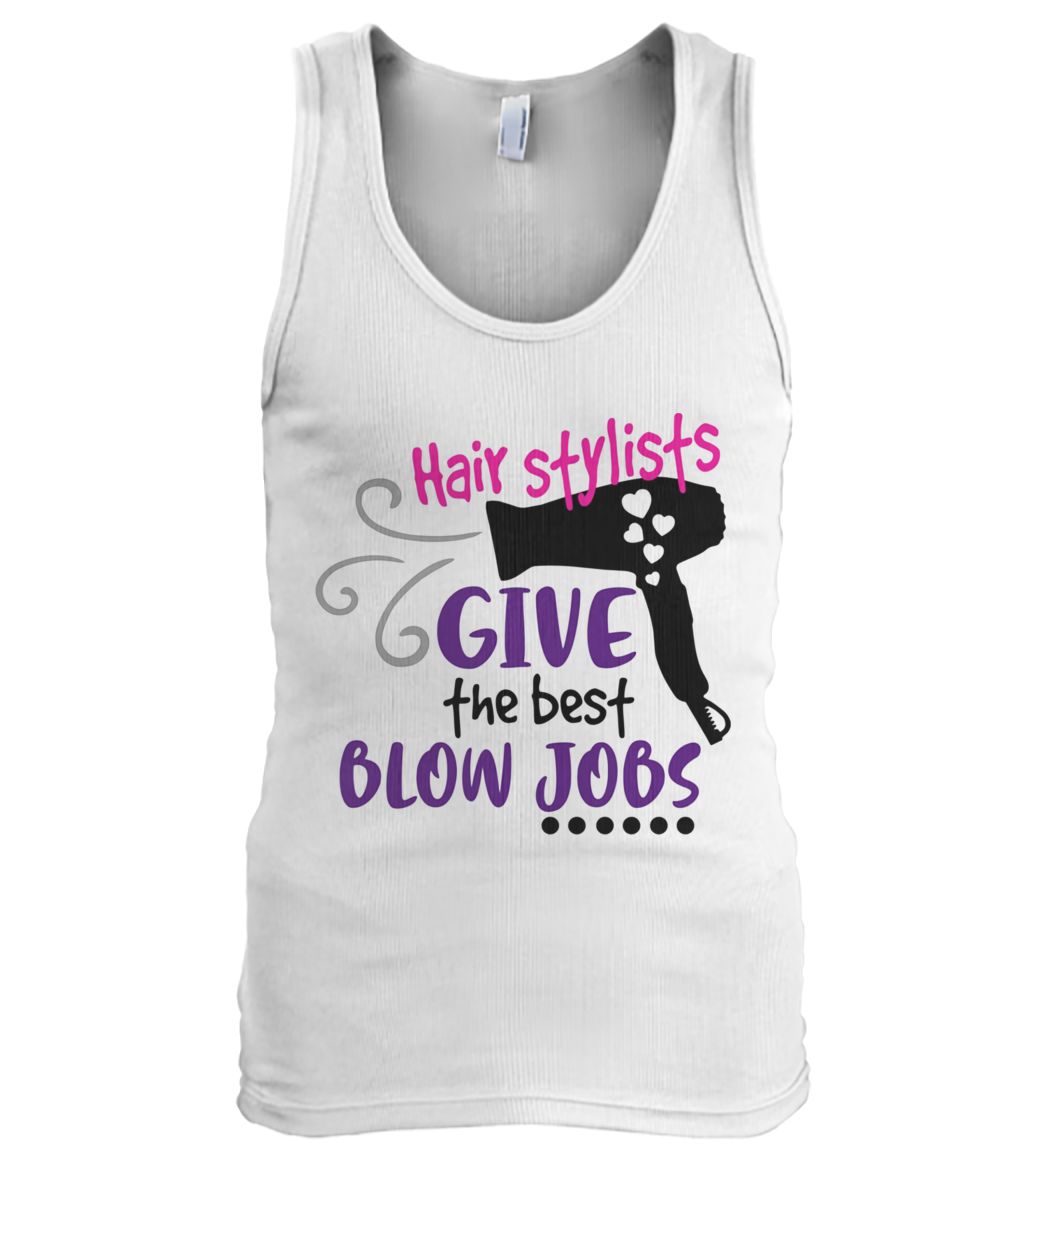 Hair stylists give the best blow jobs men's tank top